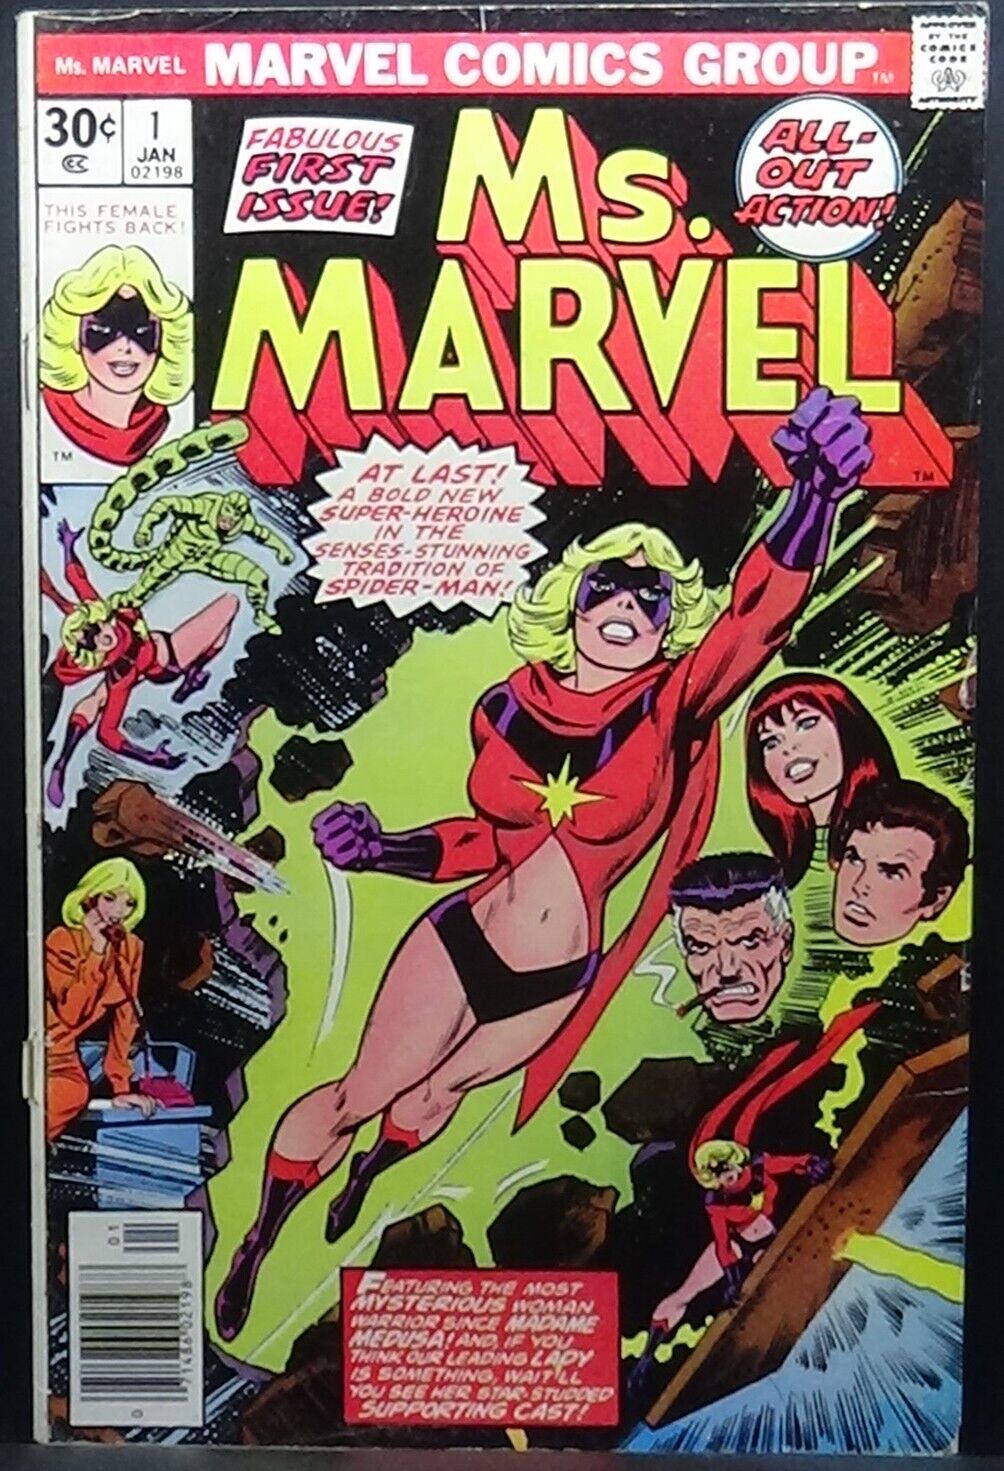 MS. MARVEL #1 5.5 VG+/FINE- 1977 BRONZE 1ST ISSUE 1ST APPEARANCE MS. MARVEL